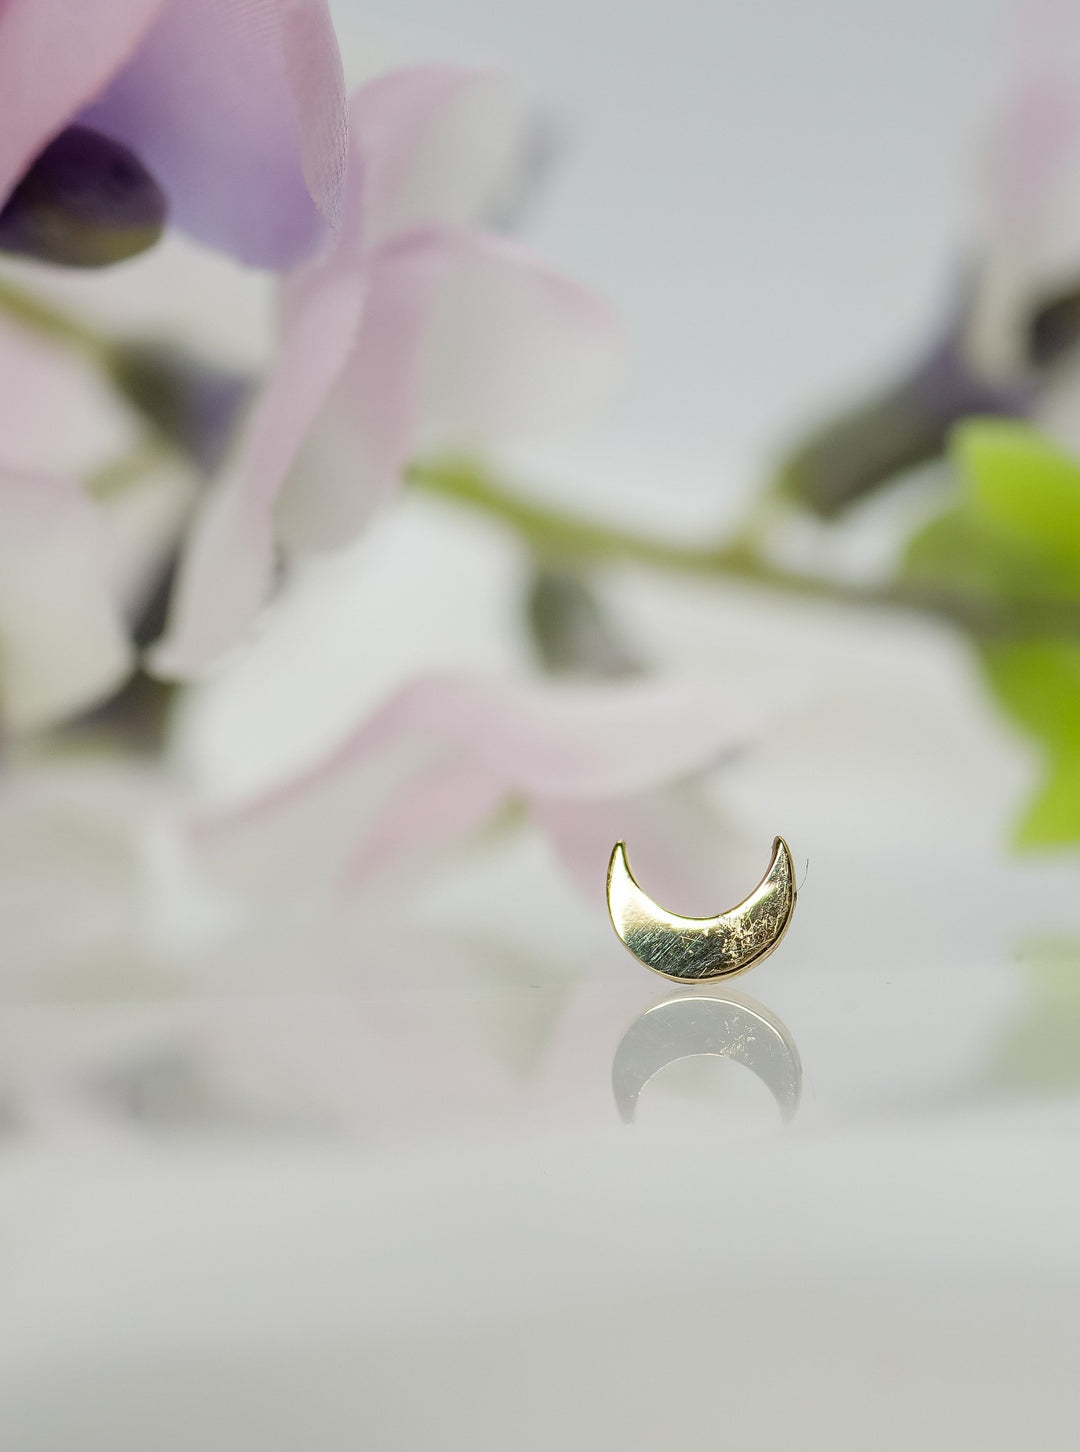 white gold crescent shaped stud for lobes, nose, cartilage piercings